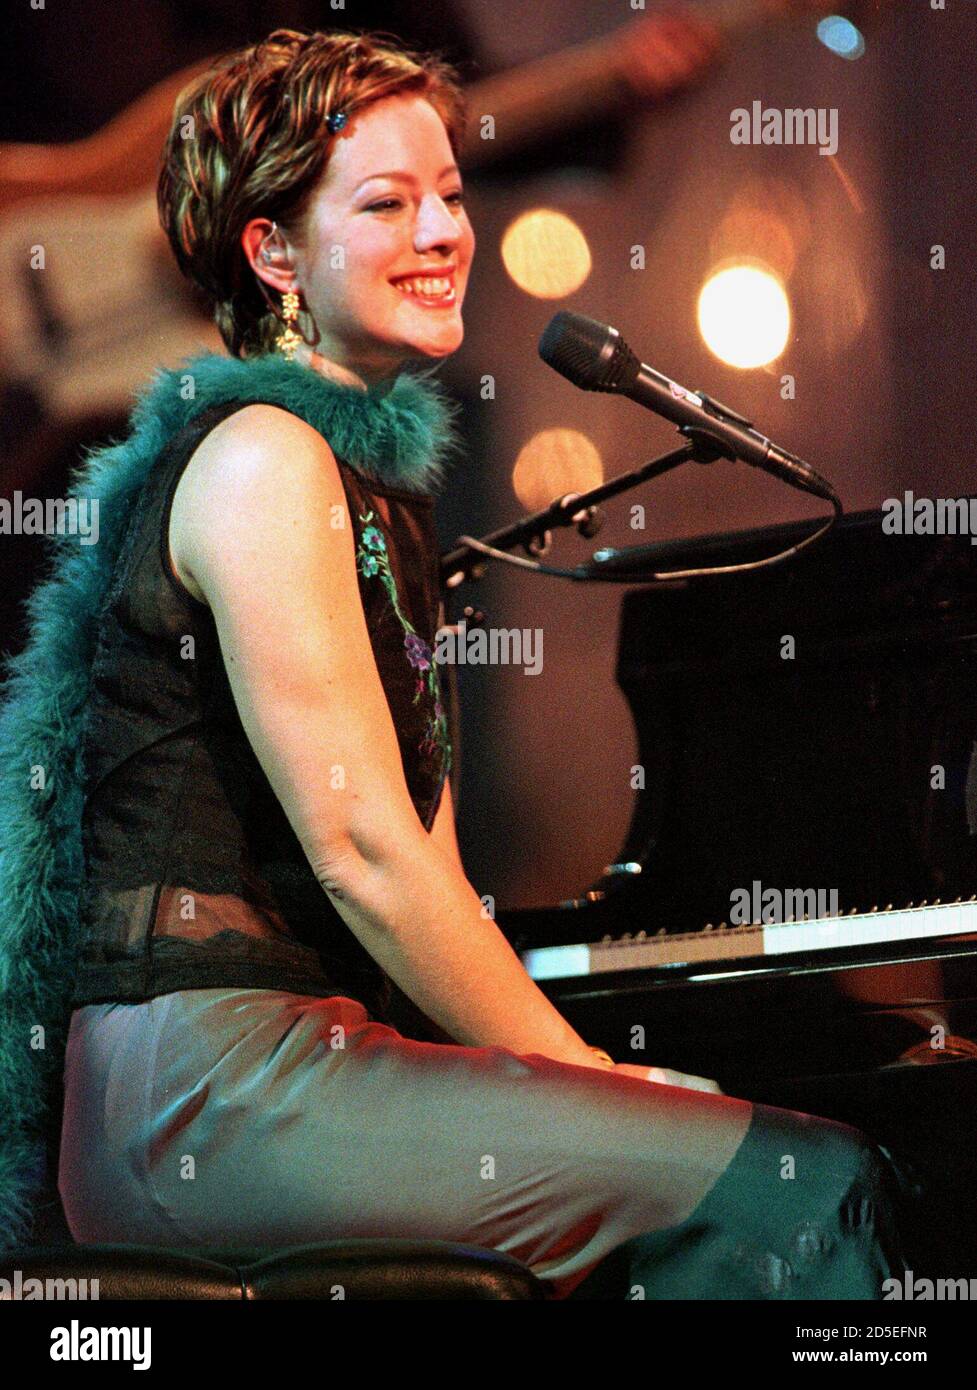 Sarah McLachlan sits as the piano as she performs her song 'Adia' at the Juno Awards March 22 in her of Vancouver. McLachlan won four Juno Awards which honour Canadian singers